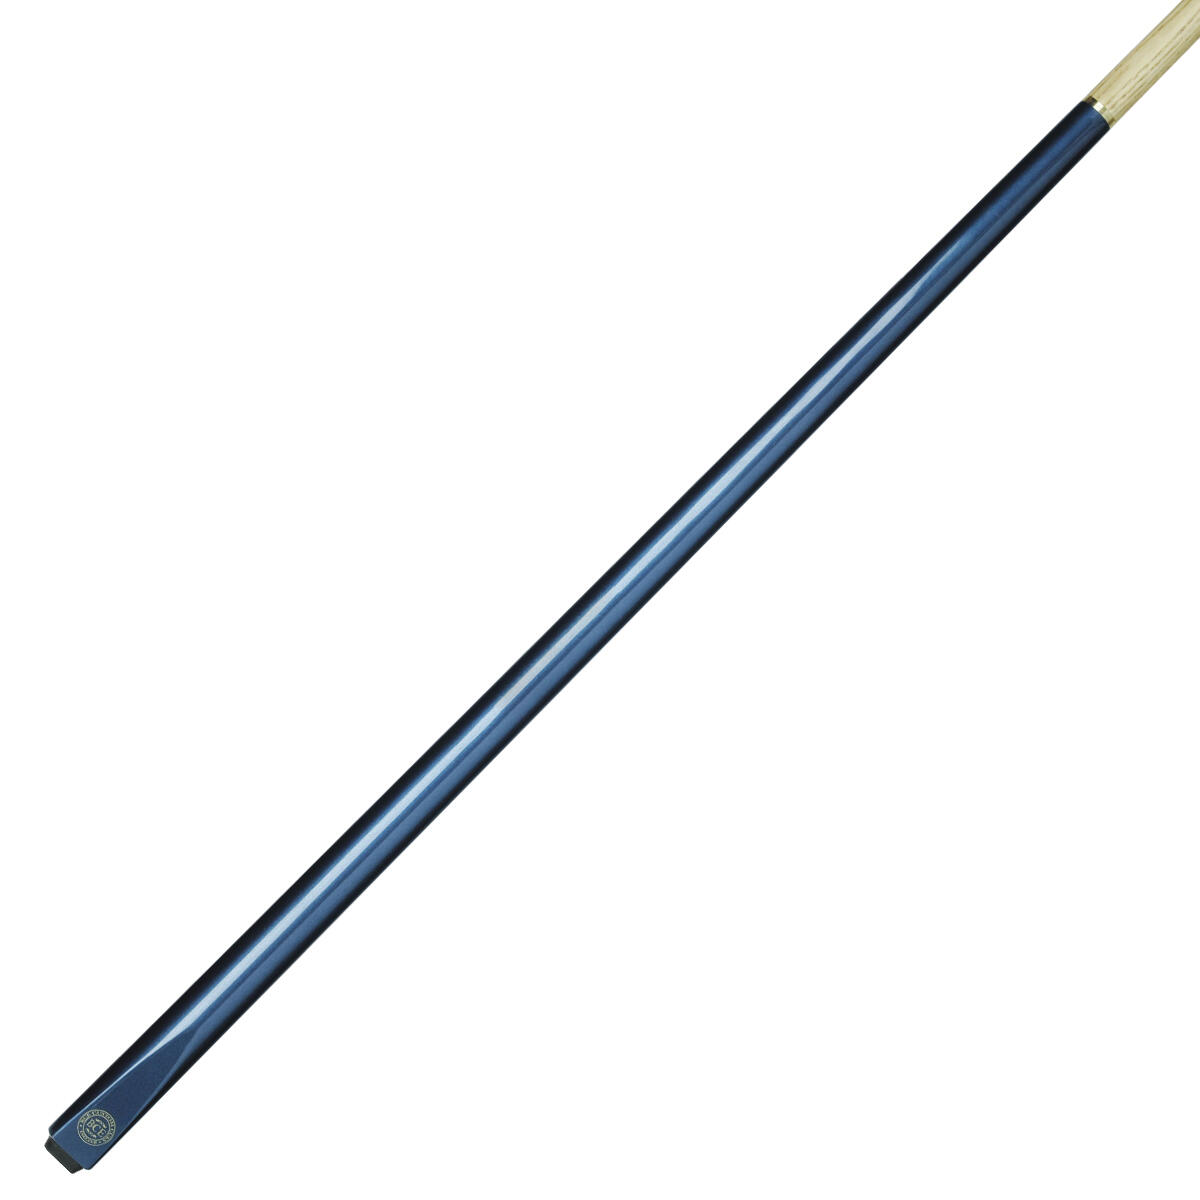 BCE BCE 2 Piece Ash Snooker/ Pool Cue - 145cm with 9.5mm tip